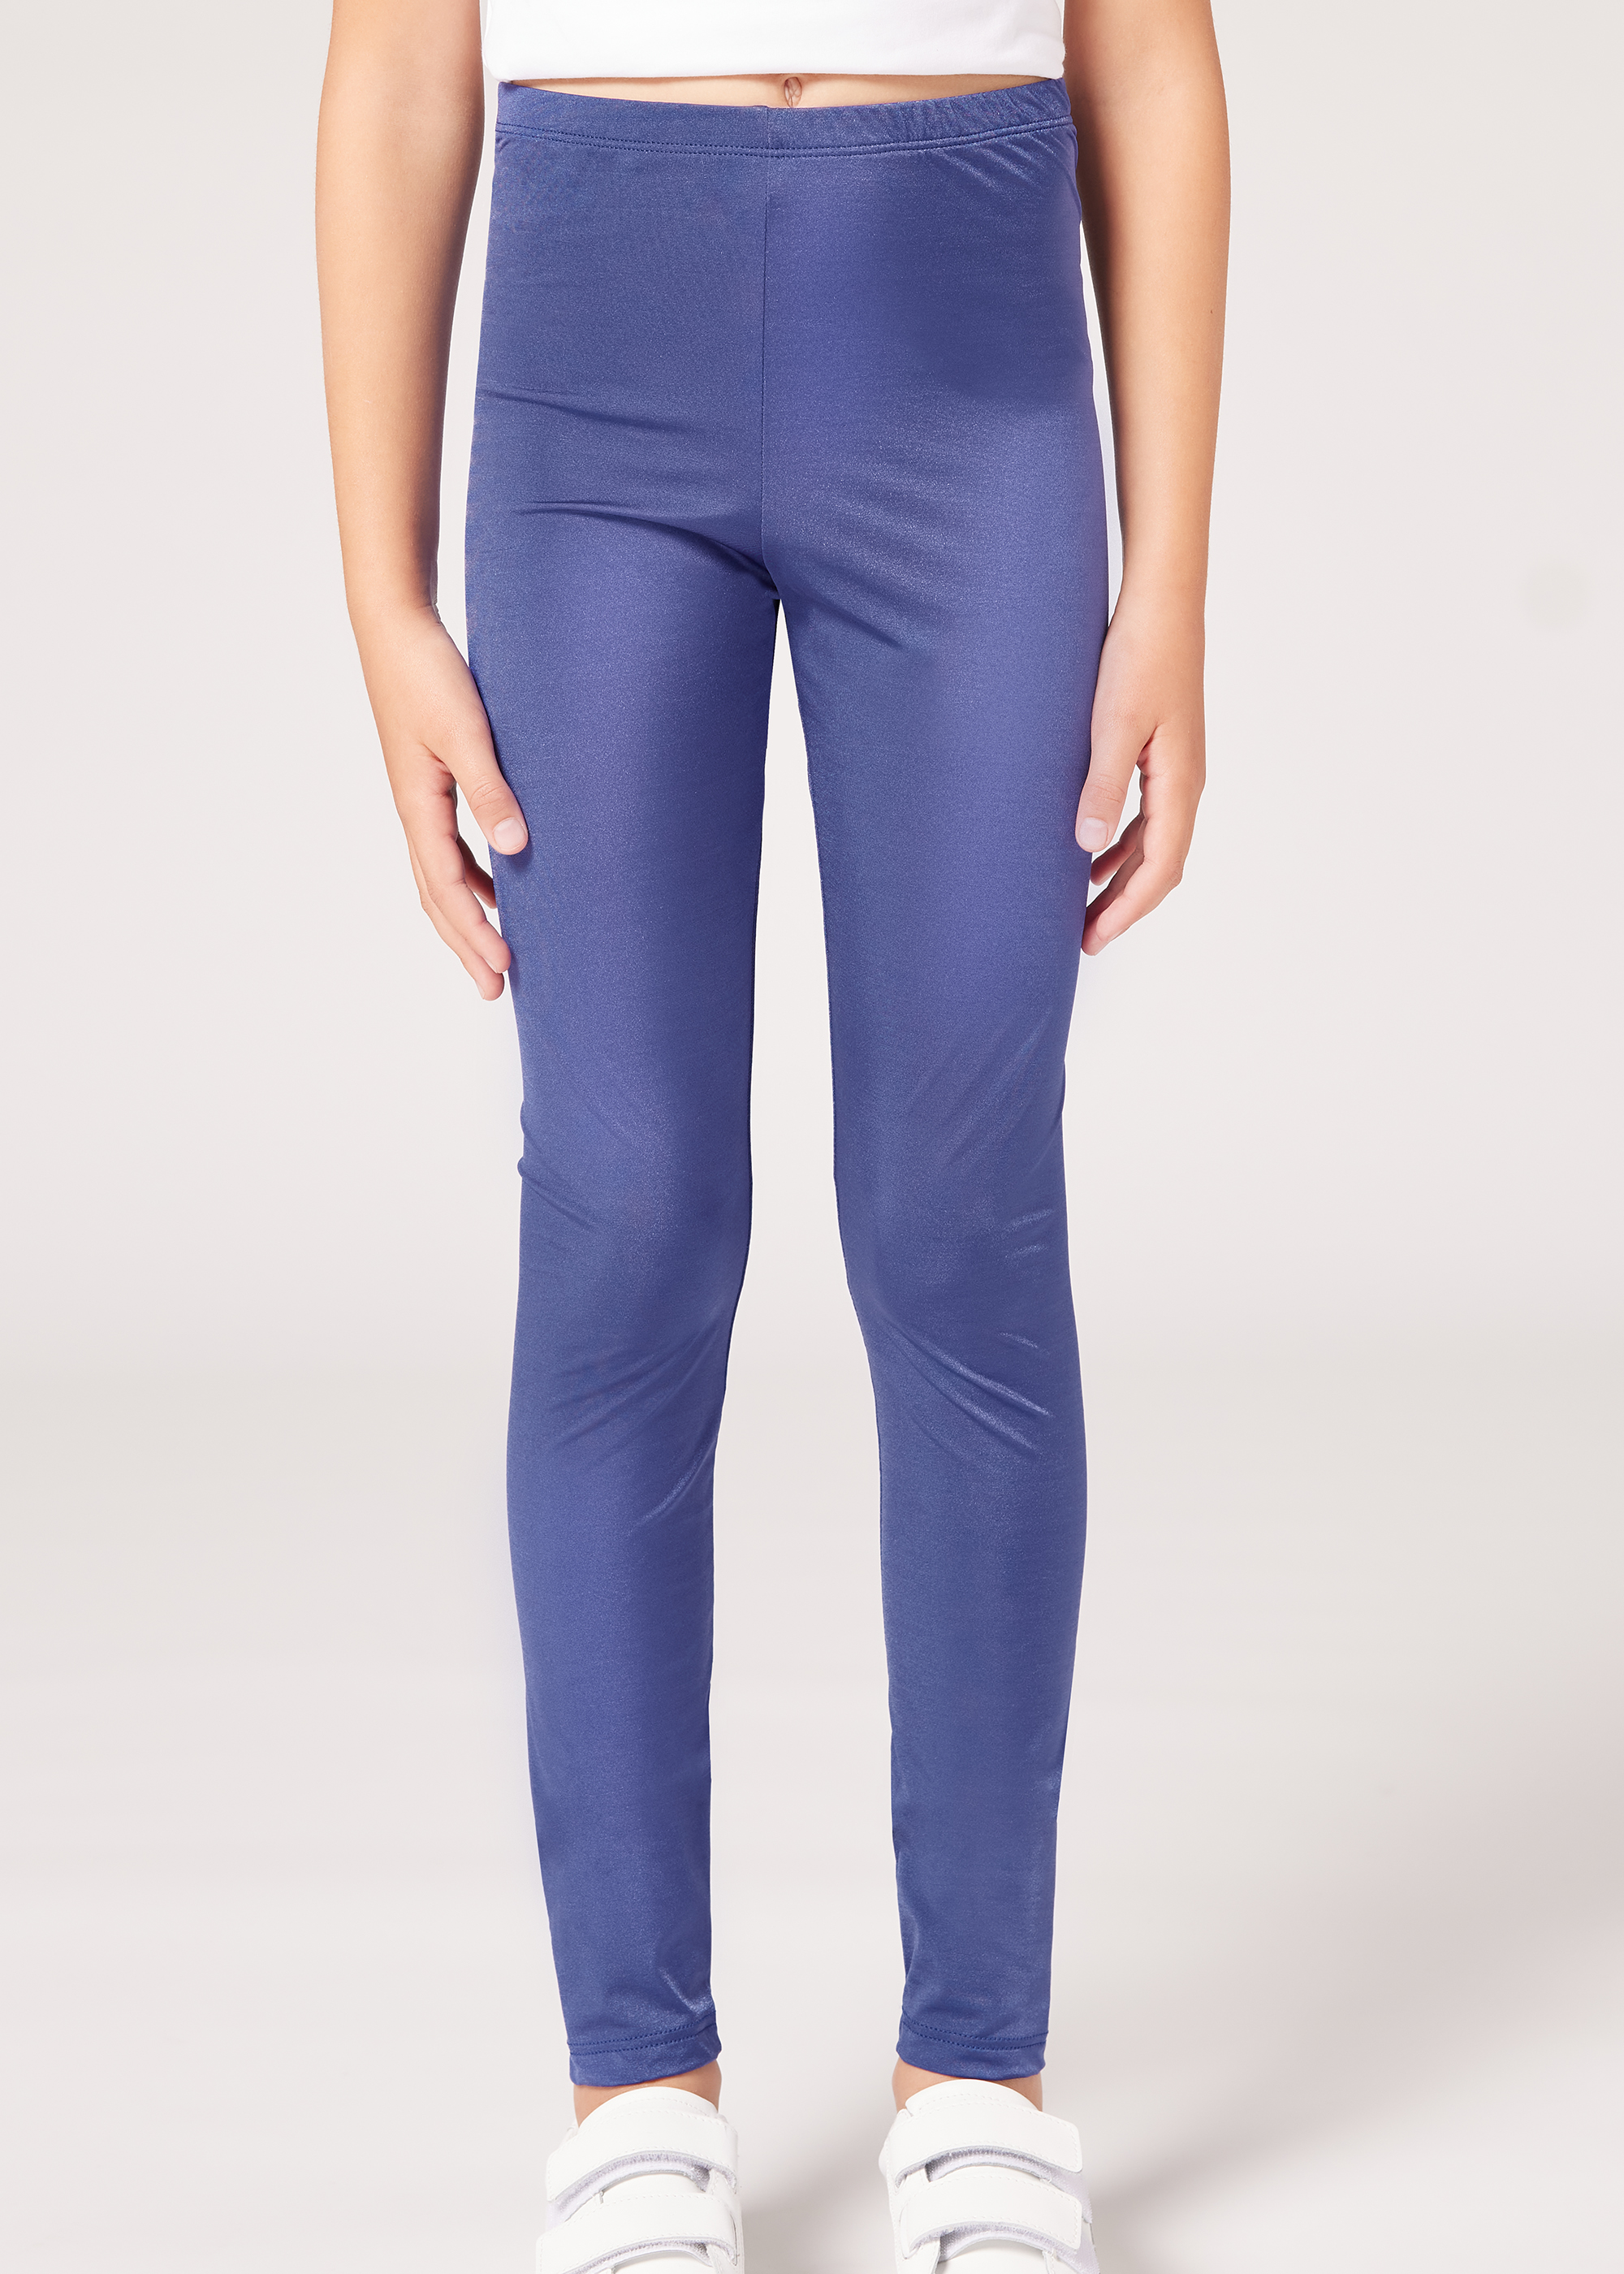 Consistency Seamless ¾ Length Leggings With Shaping Detail In